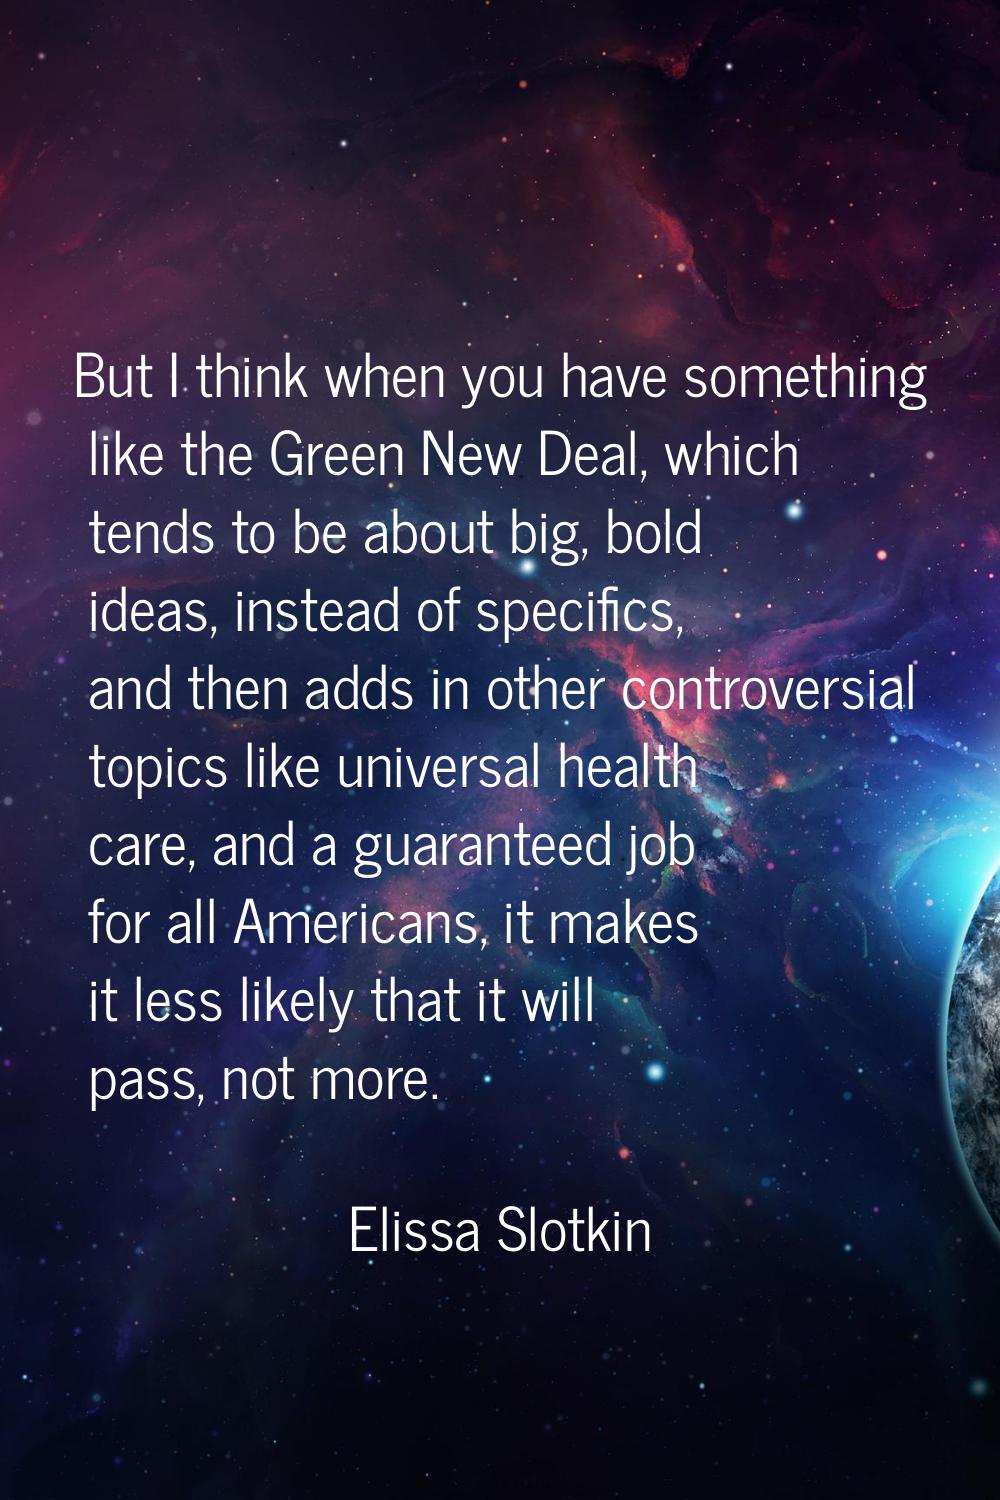 But I think when you have something like the Green New Deal, which tends to be about big, bold idea